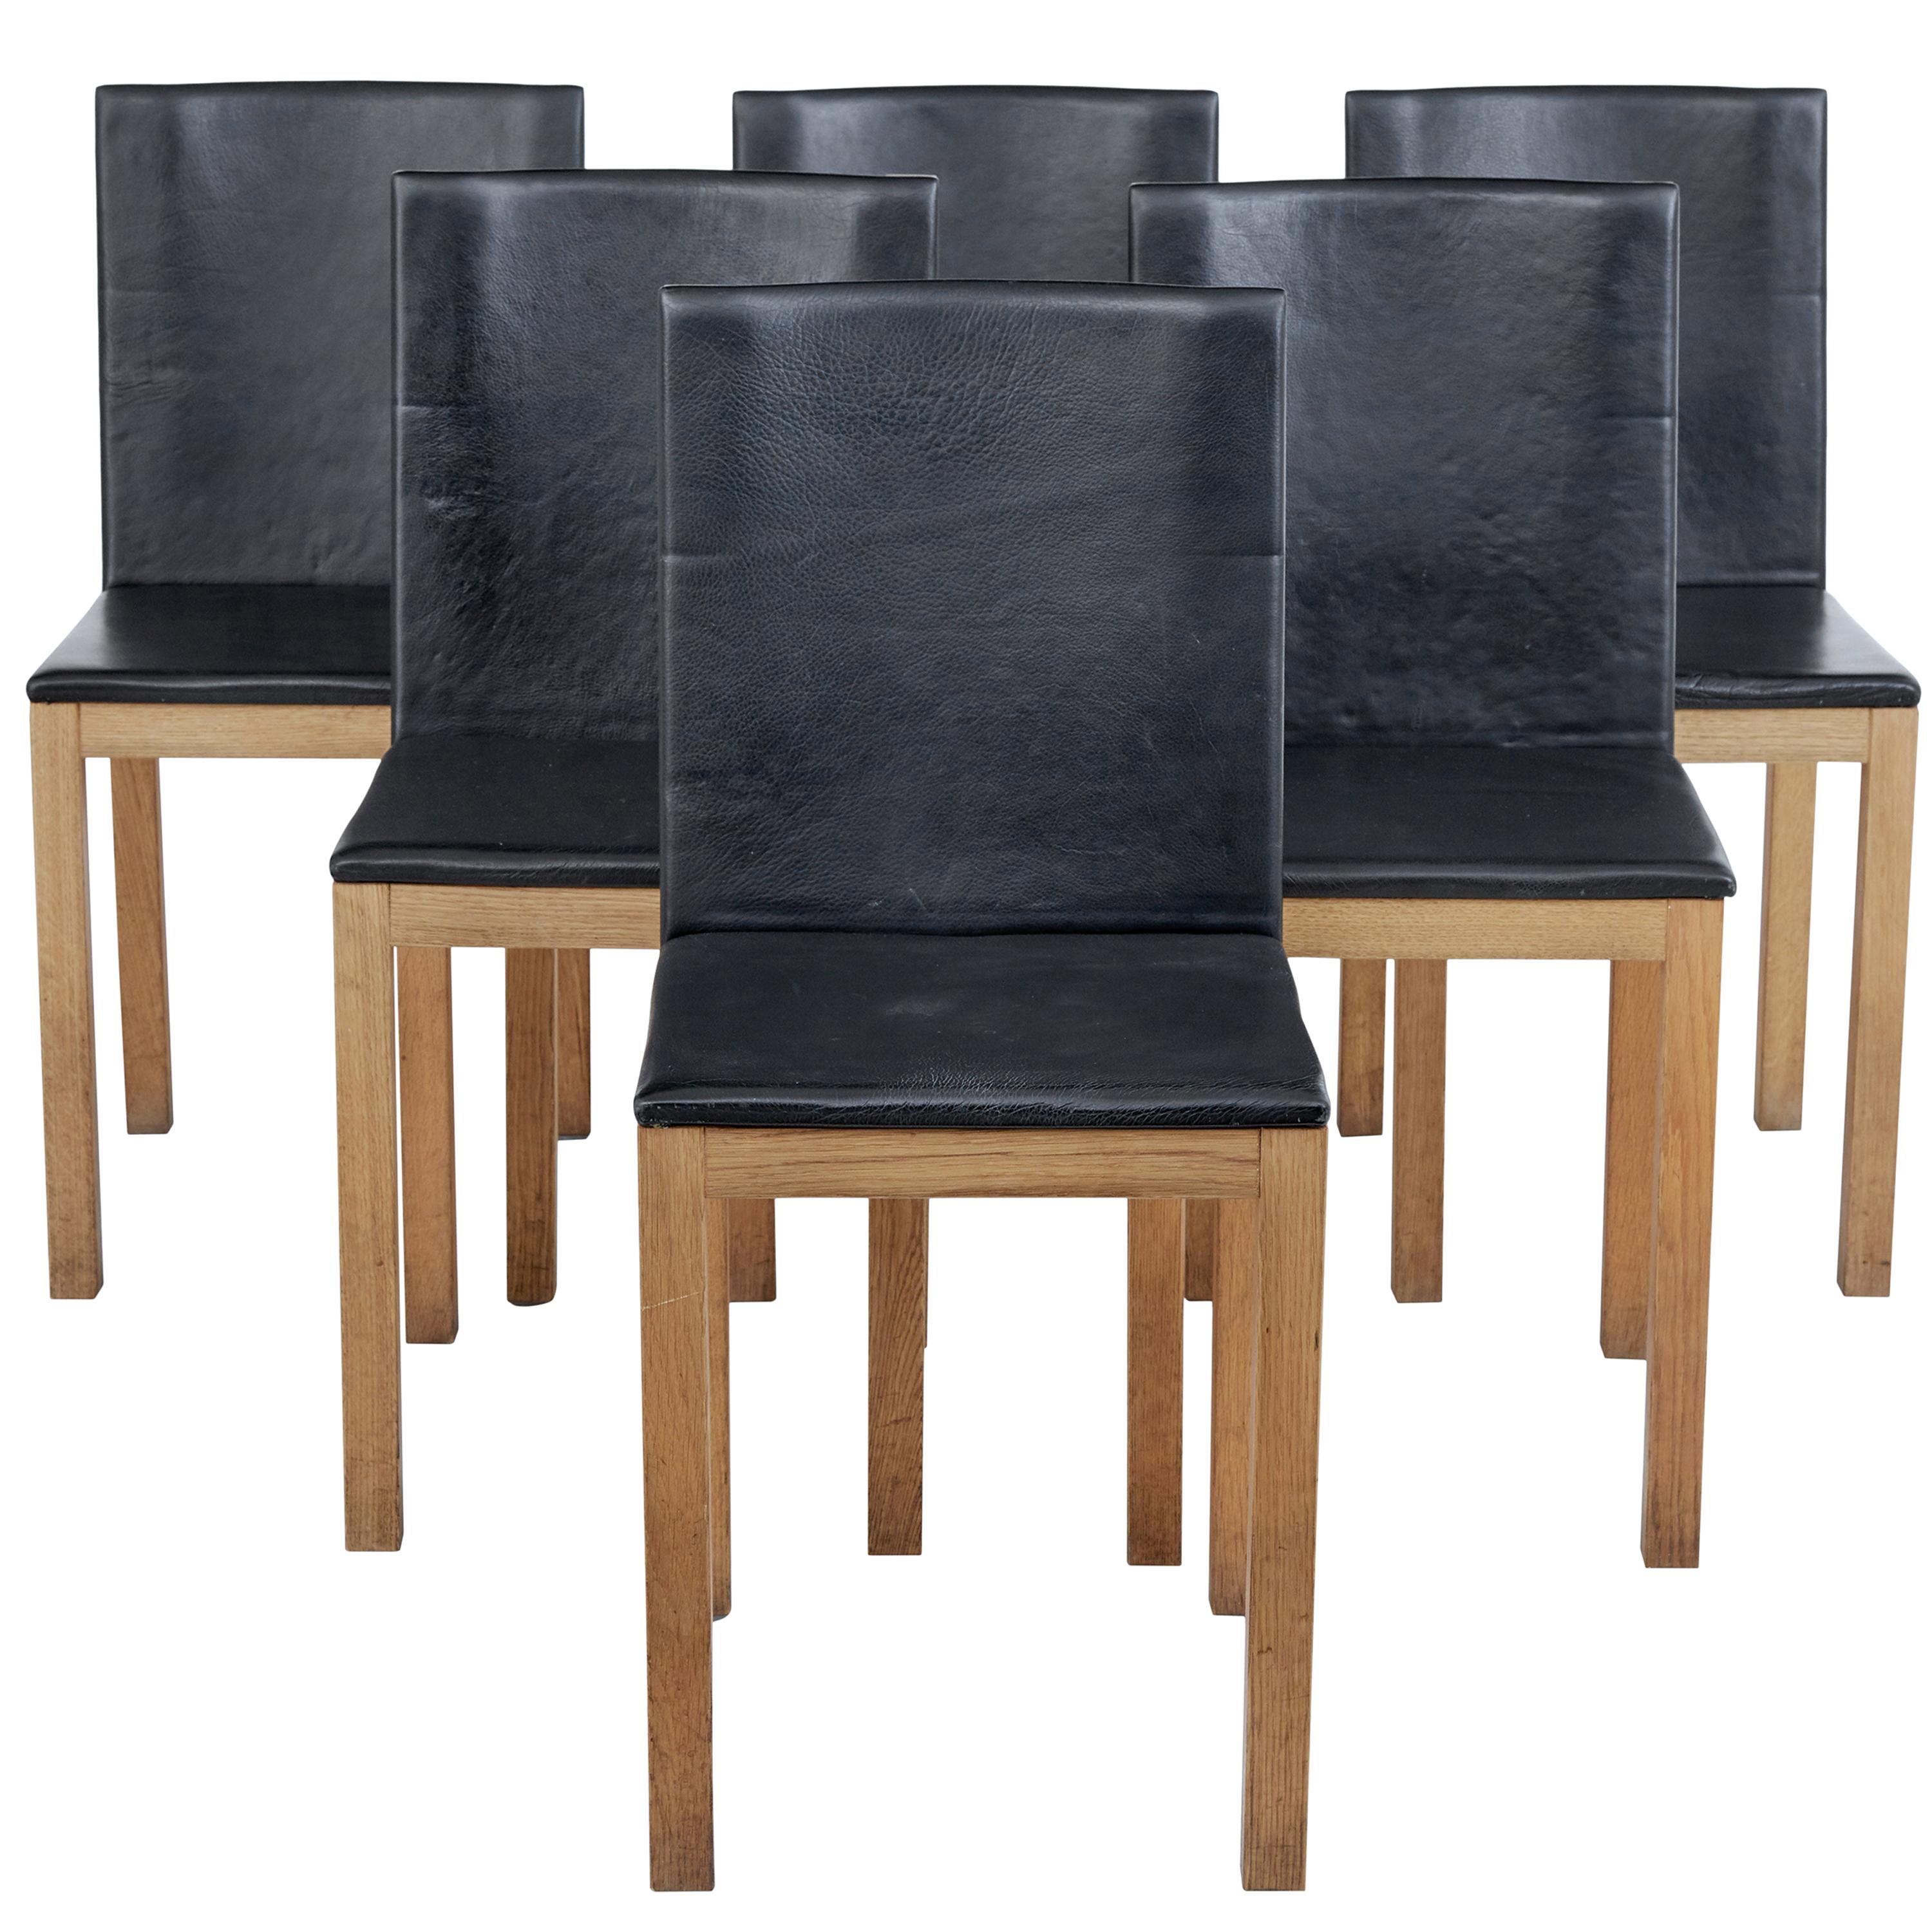 Set of 6 Oak and Leather Scandinavian Dining Chairs by Gemla